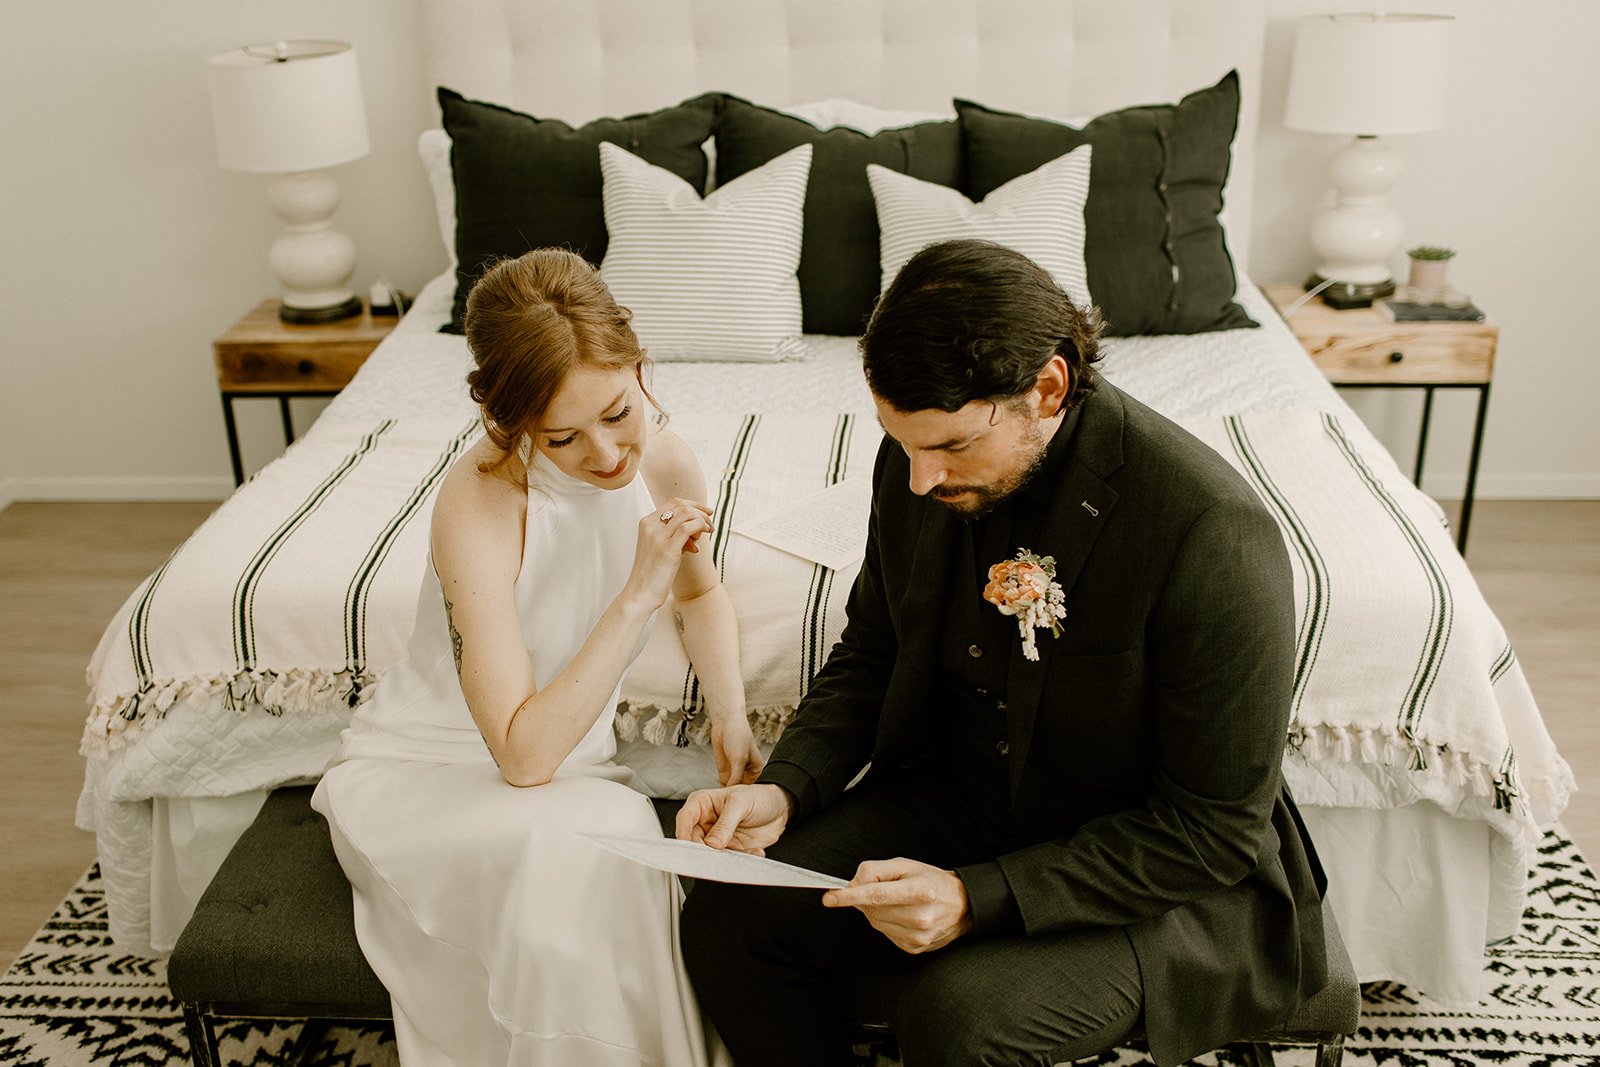 Groom reading a letter from his parents while seated next to the bride in the bedroom of their Airbnb